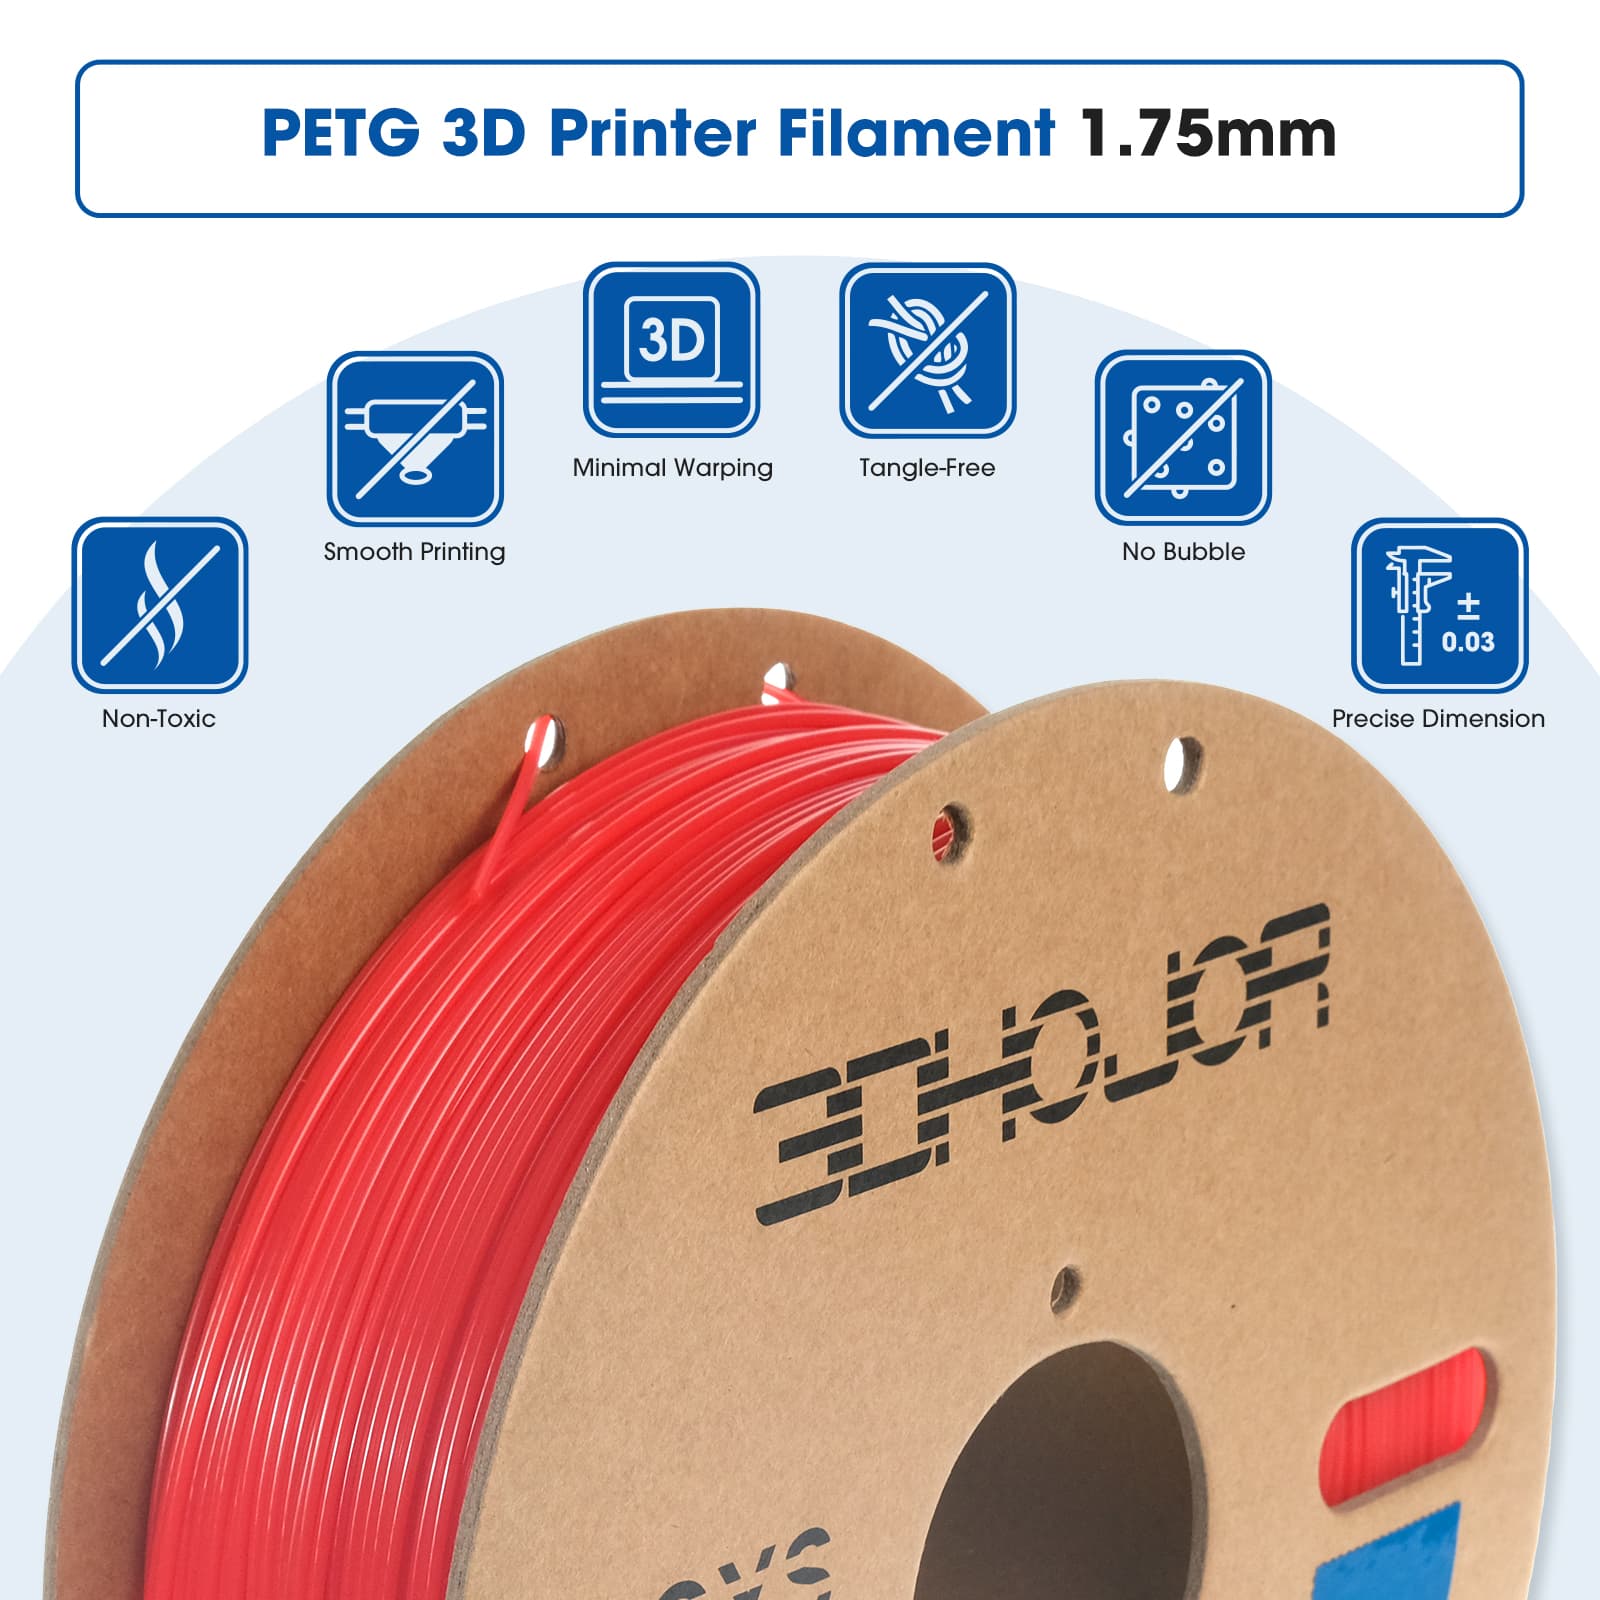 3DHoJor PETG Filament 1.75mm Solid Red, 3D Printing Filament 1kg Spool(2.2lbs), 3D Filament 1.75mm Dimensional Accuracy +/- 0.03mm Non Tangling Non Clogging Non Stringing,Print with Most 3D Printers…